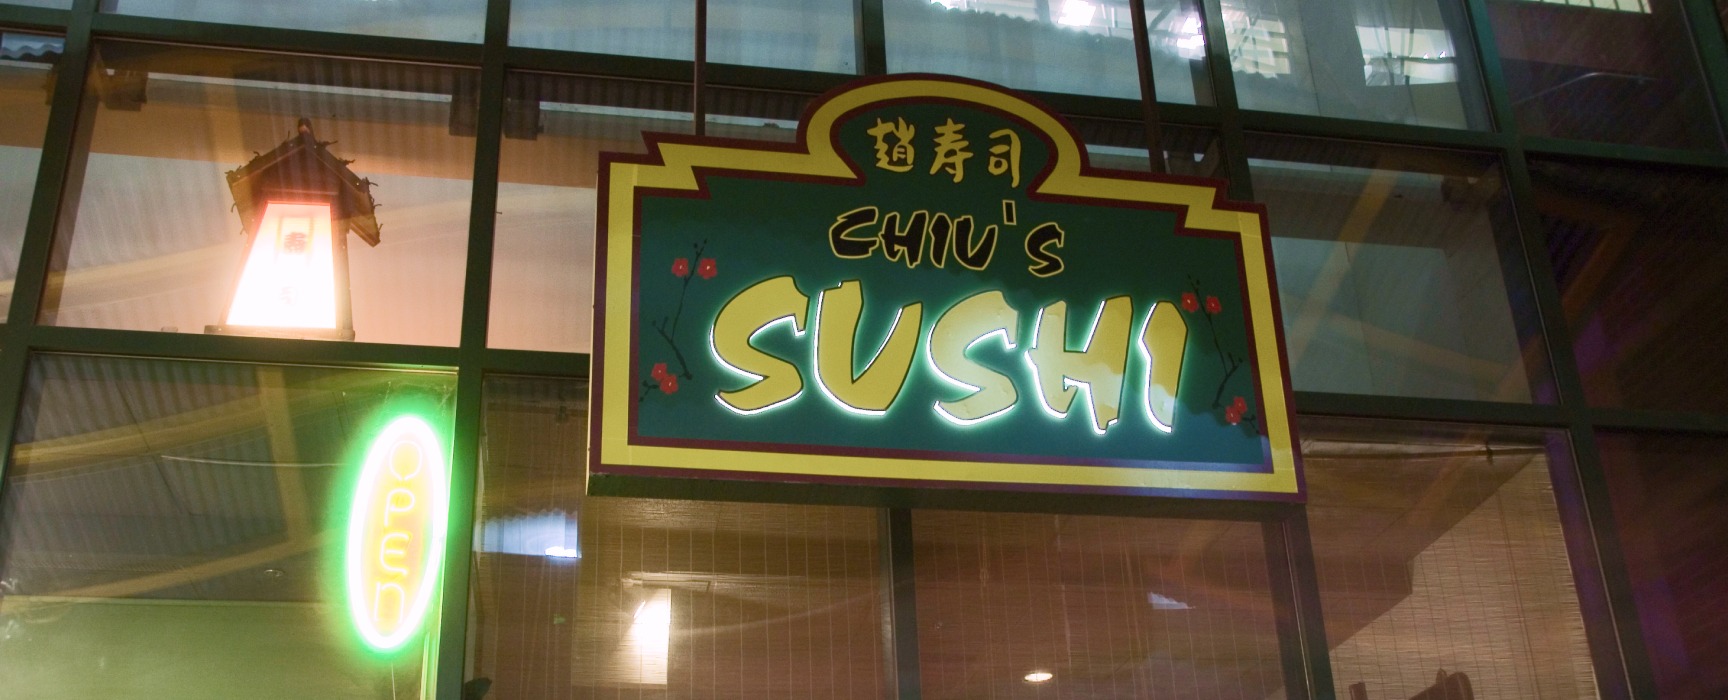 Green and yellow exterior business sign of Chiu's Sushi, lit up and on the exterior window of the storefront